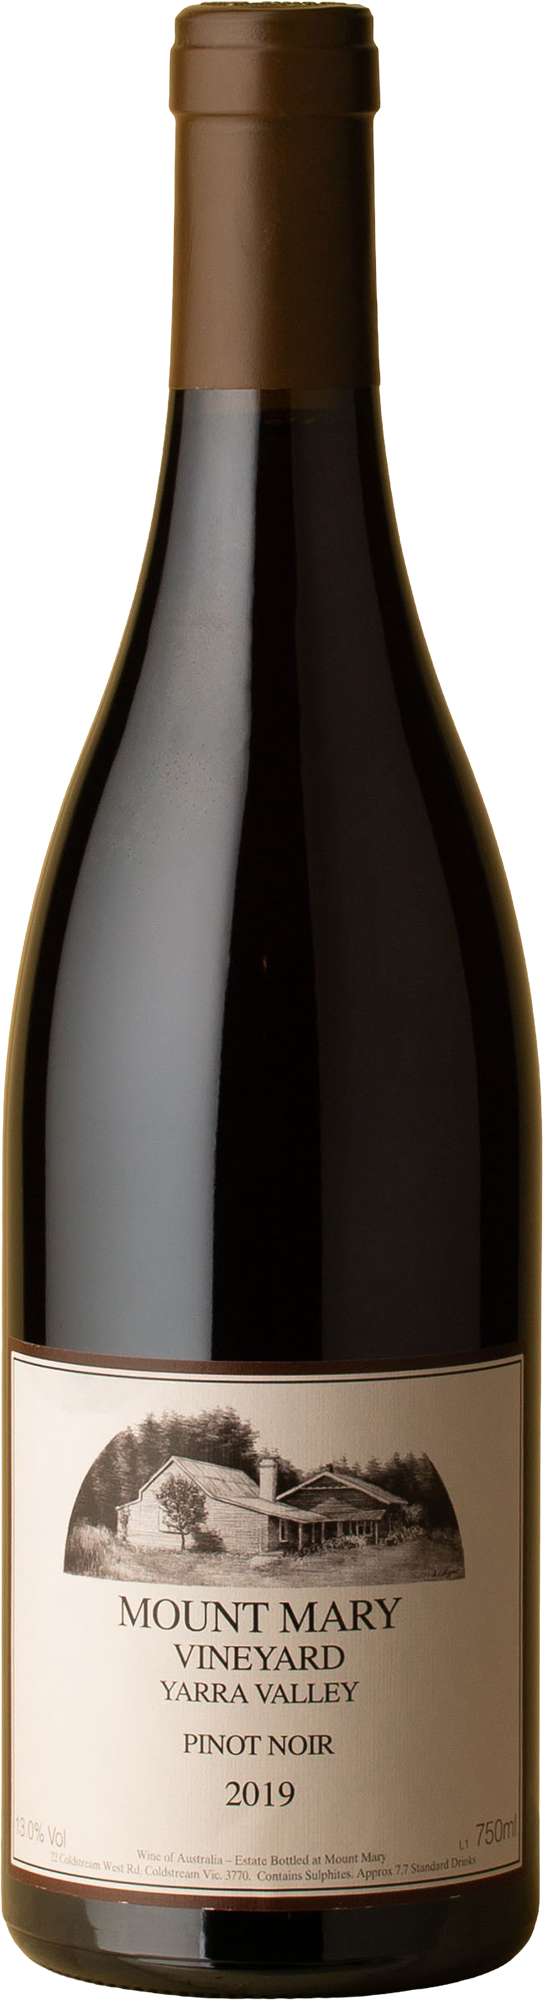 Mount Mary - Pinot Noir 2019 Red Wine